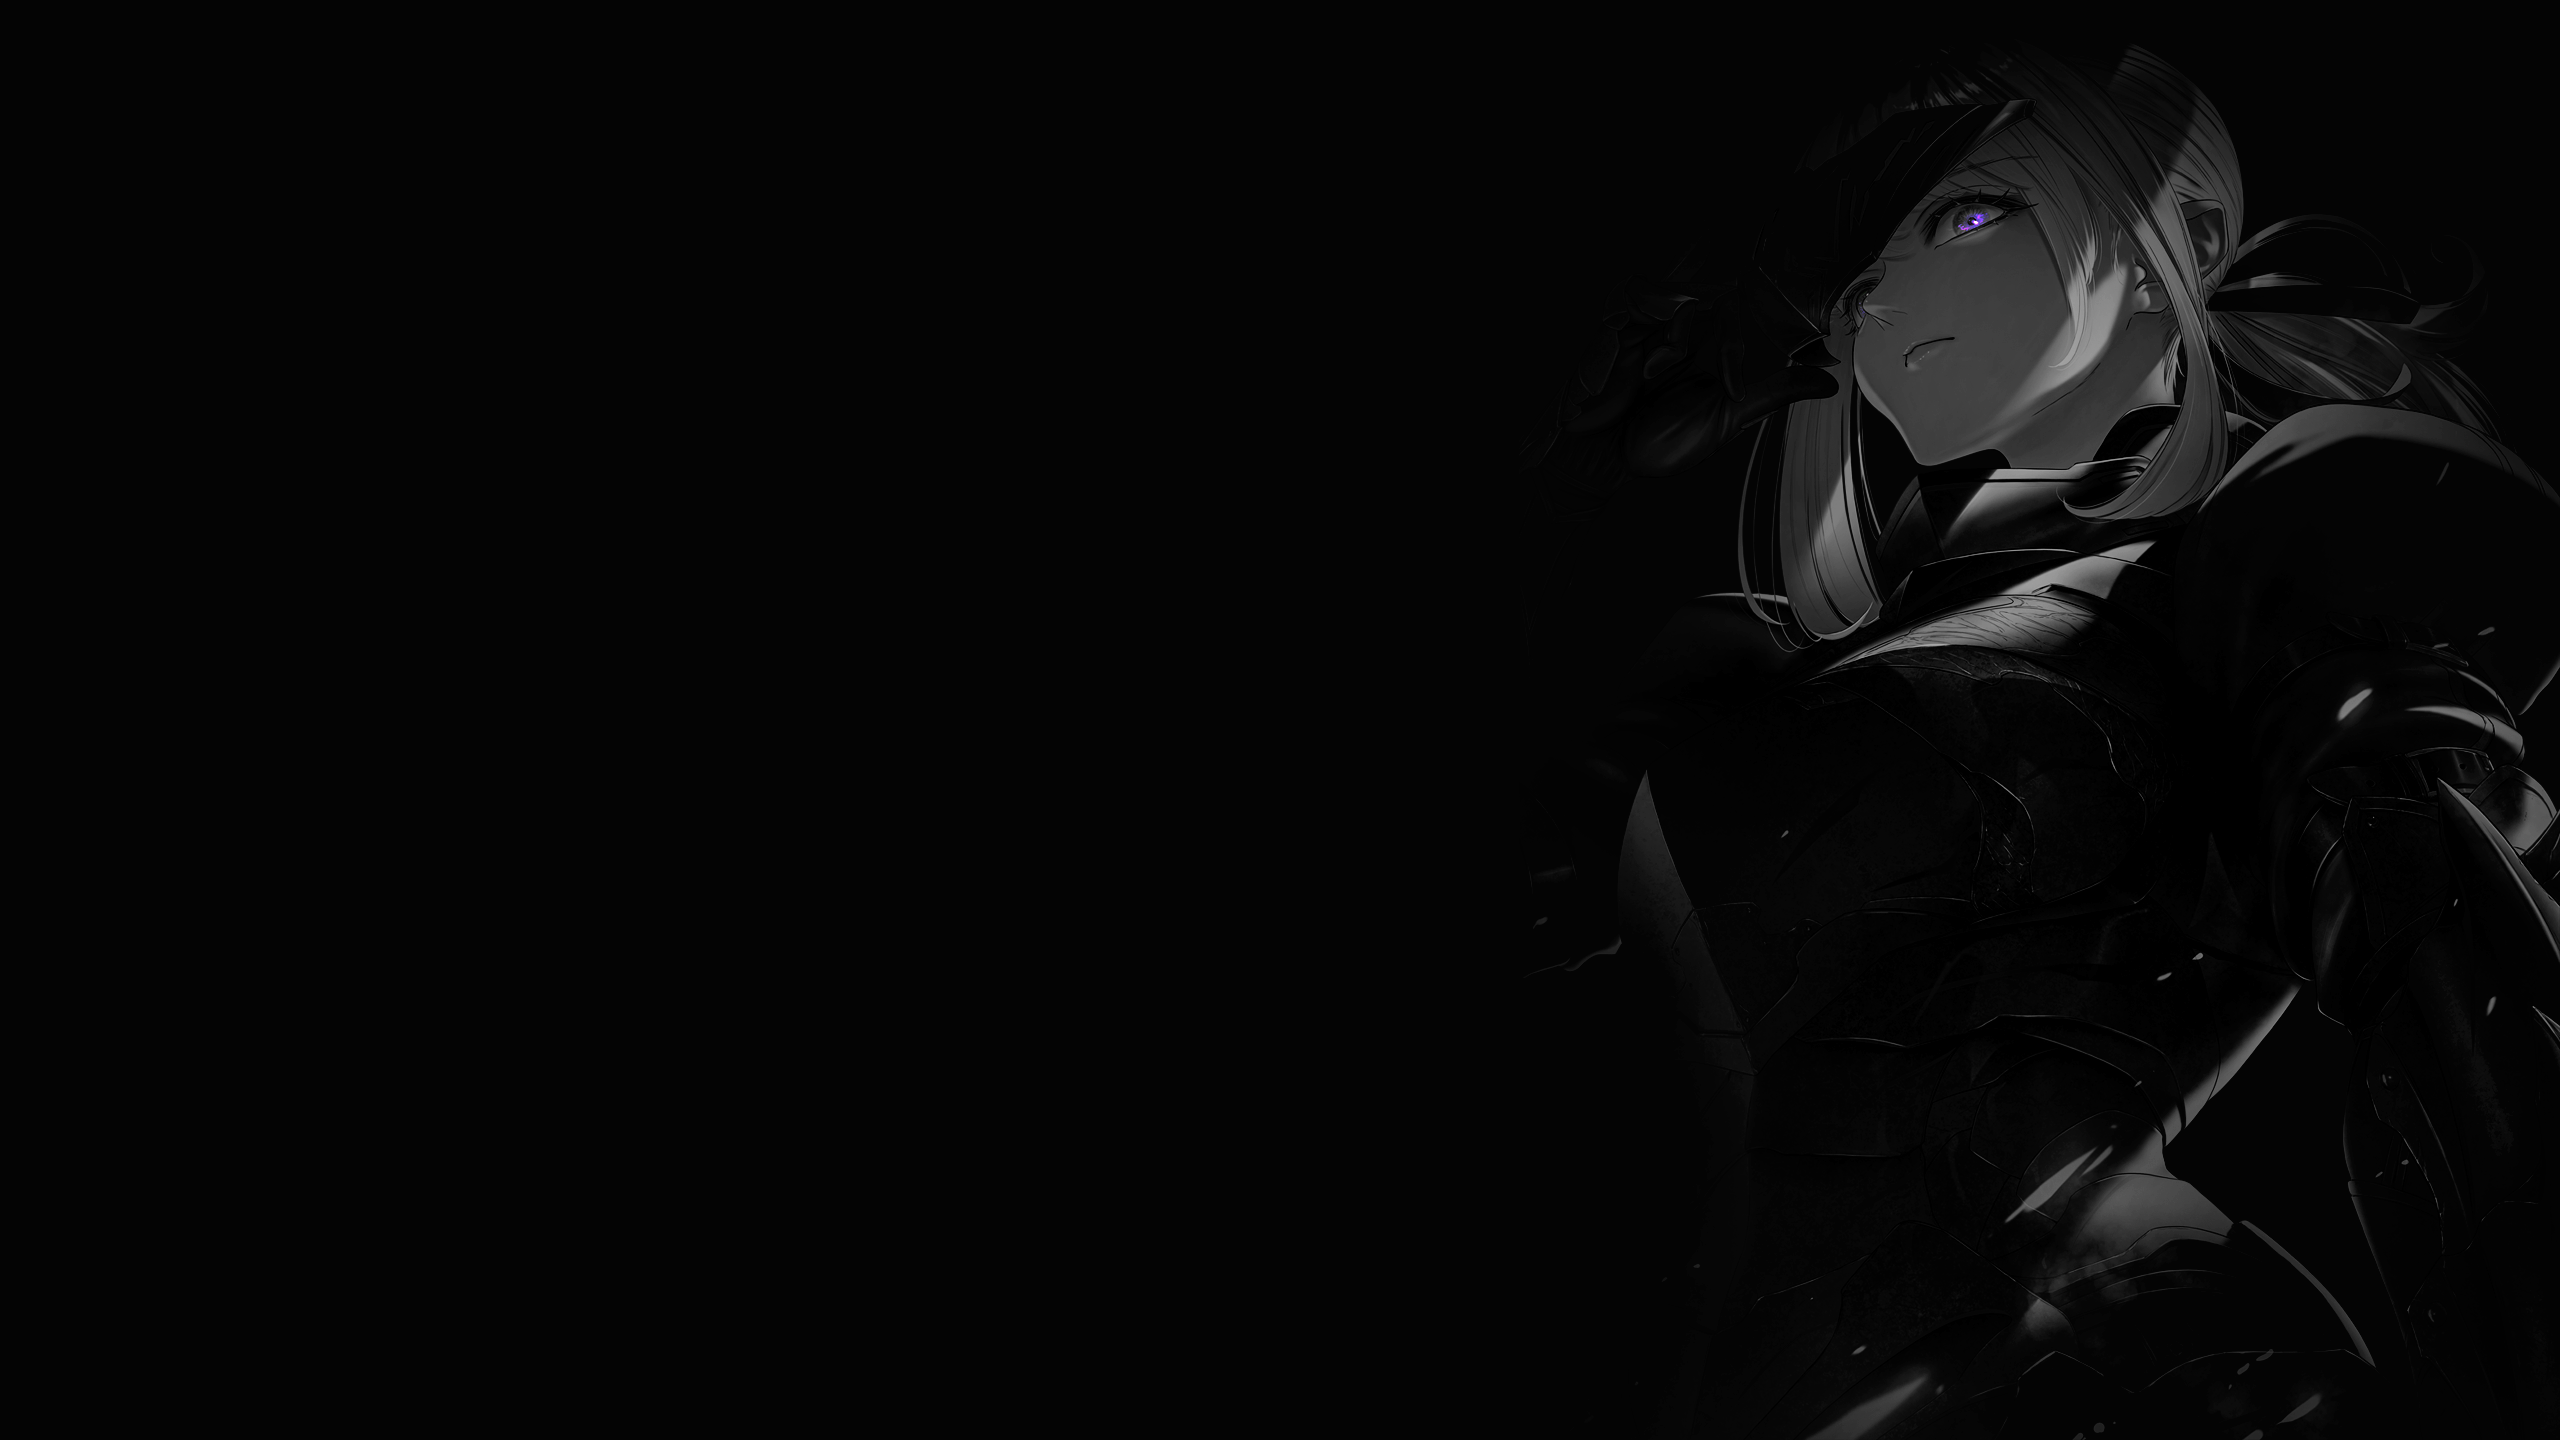 selective coloring, black background, dark background, simple background,  anime girls | 2560x1440 Wallpaper 